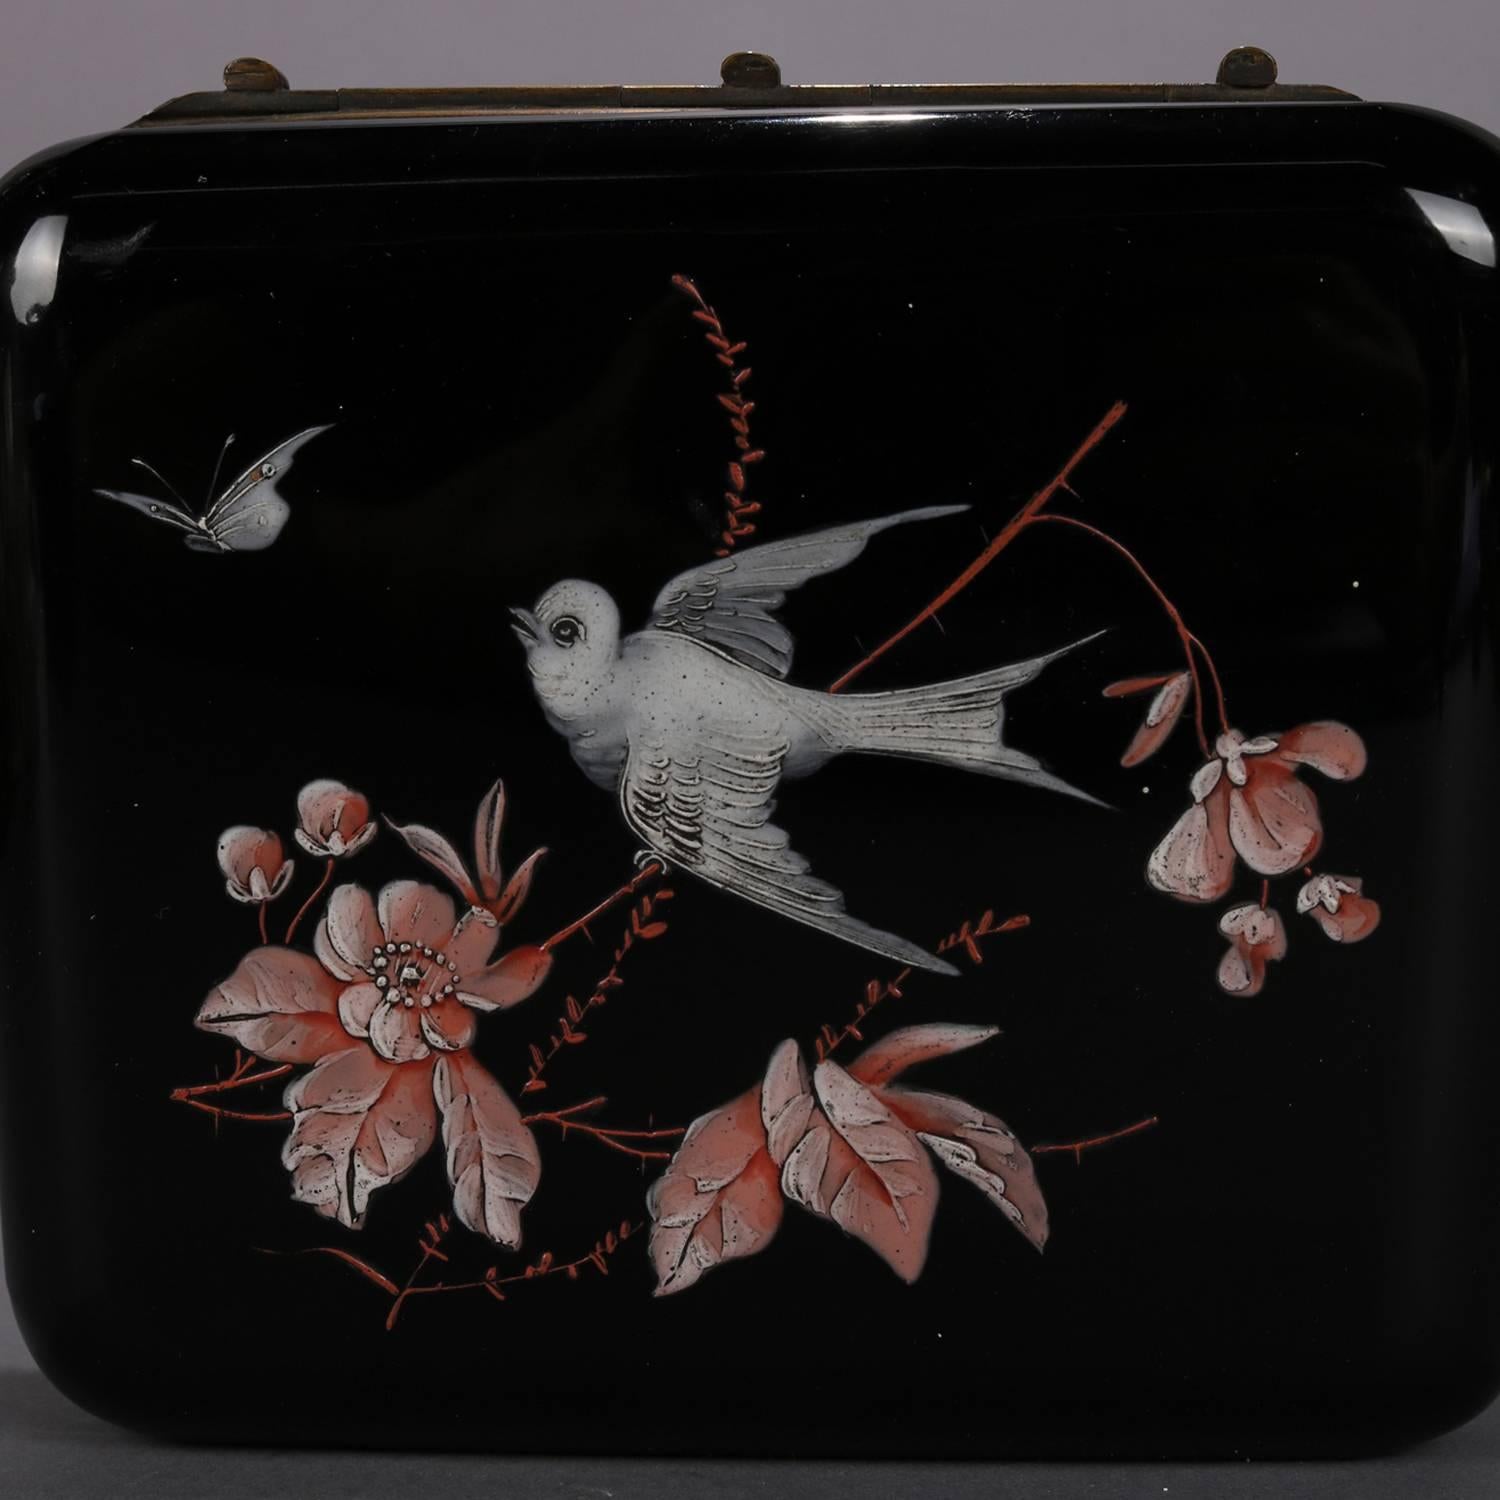 Oversized Victorian amethyst glass dresser jewelry box features hand-painted enamel sparrows in floral setting and has gilt cast bronze mounts including floral garland handles and scrolled feet with Jenny Lind masks, circa 1890.

Measures: 4.5